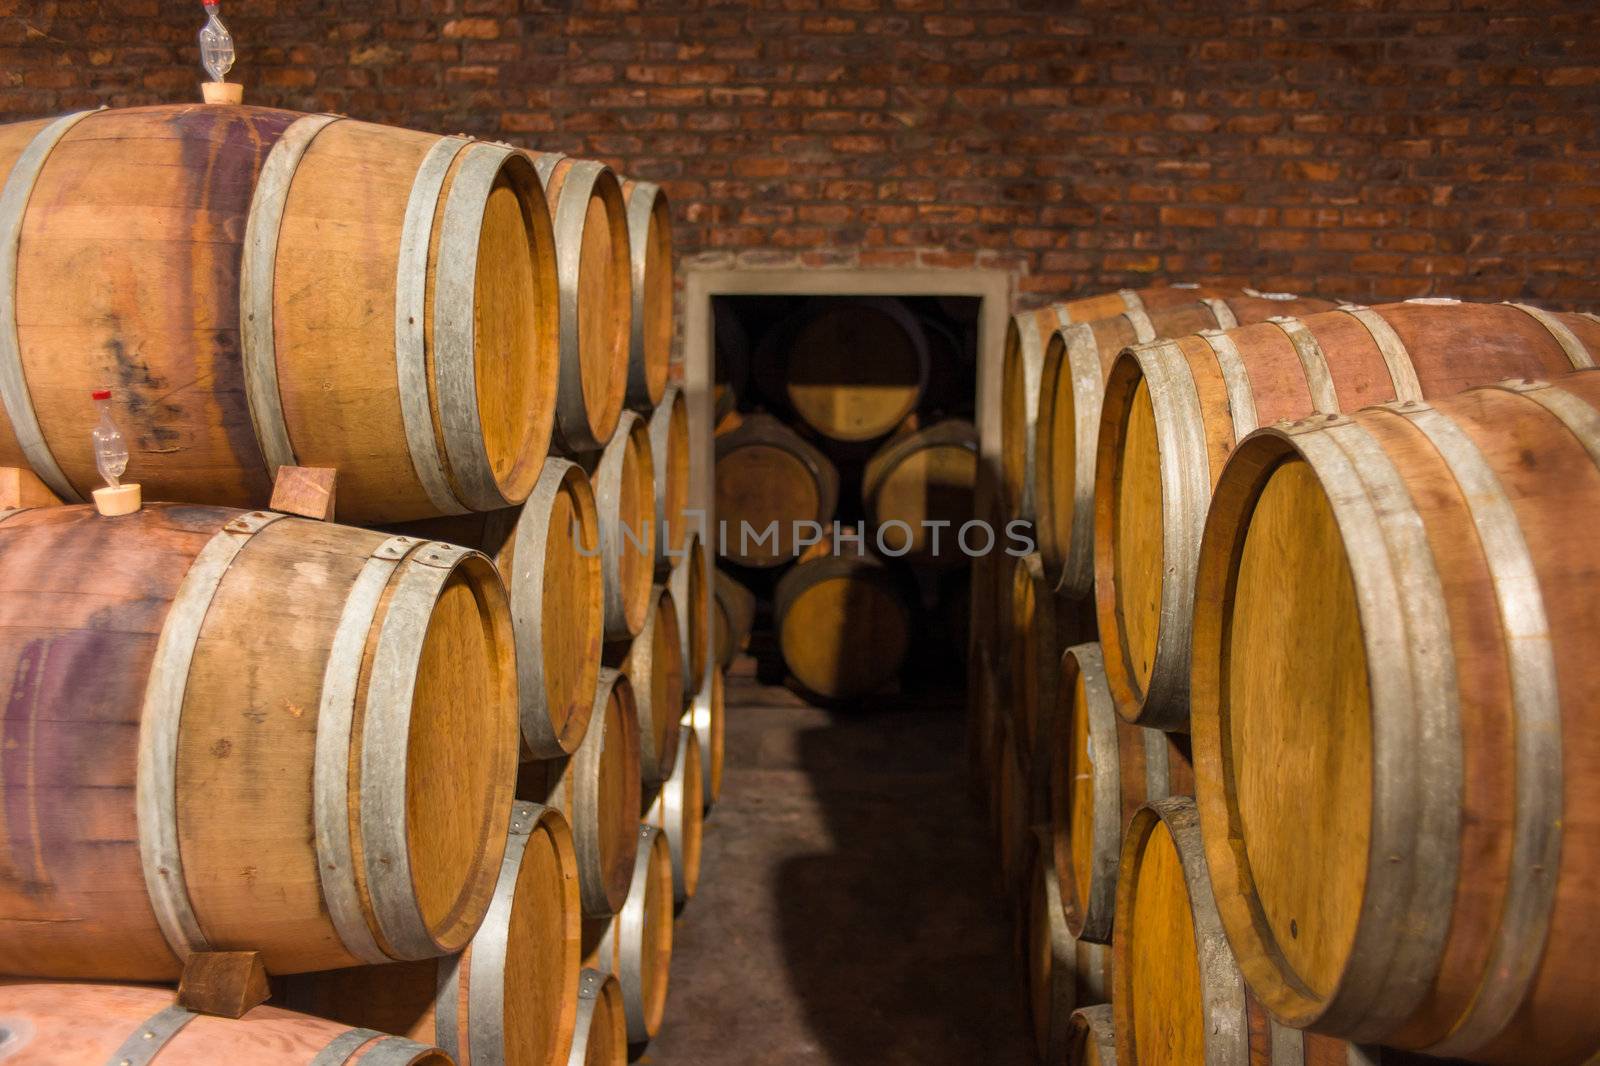 Barrels of South African wine in a wine cellar